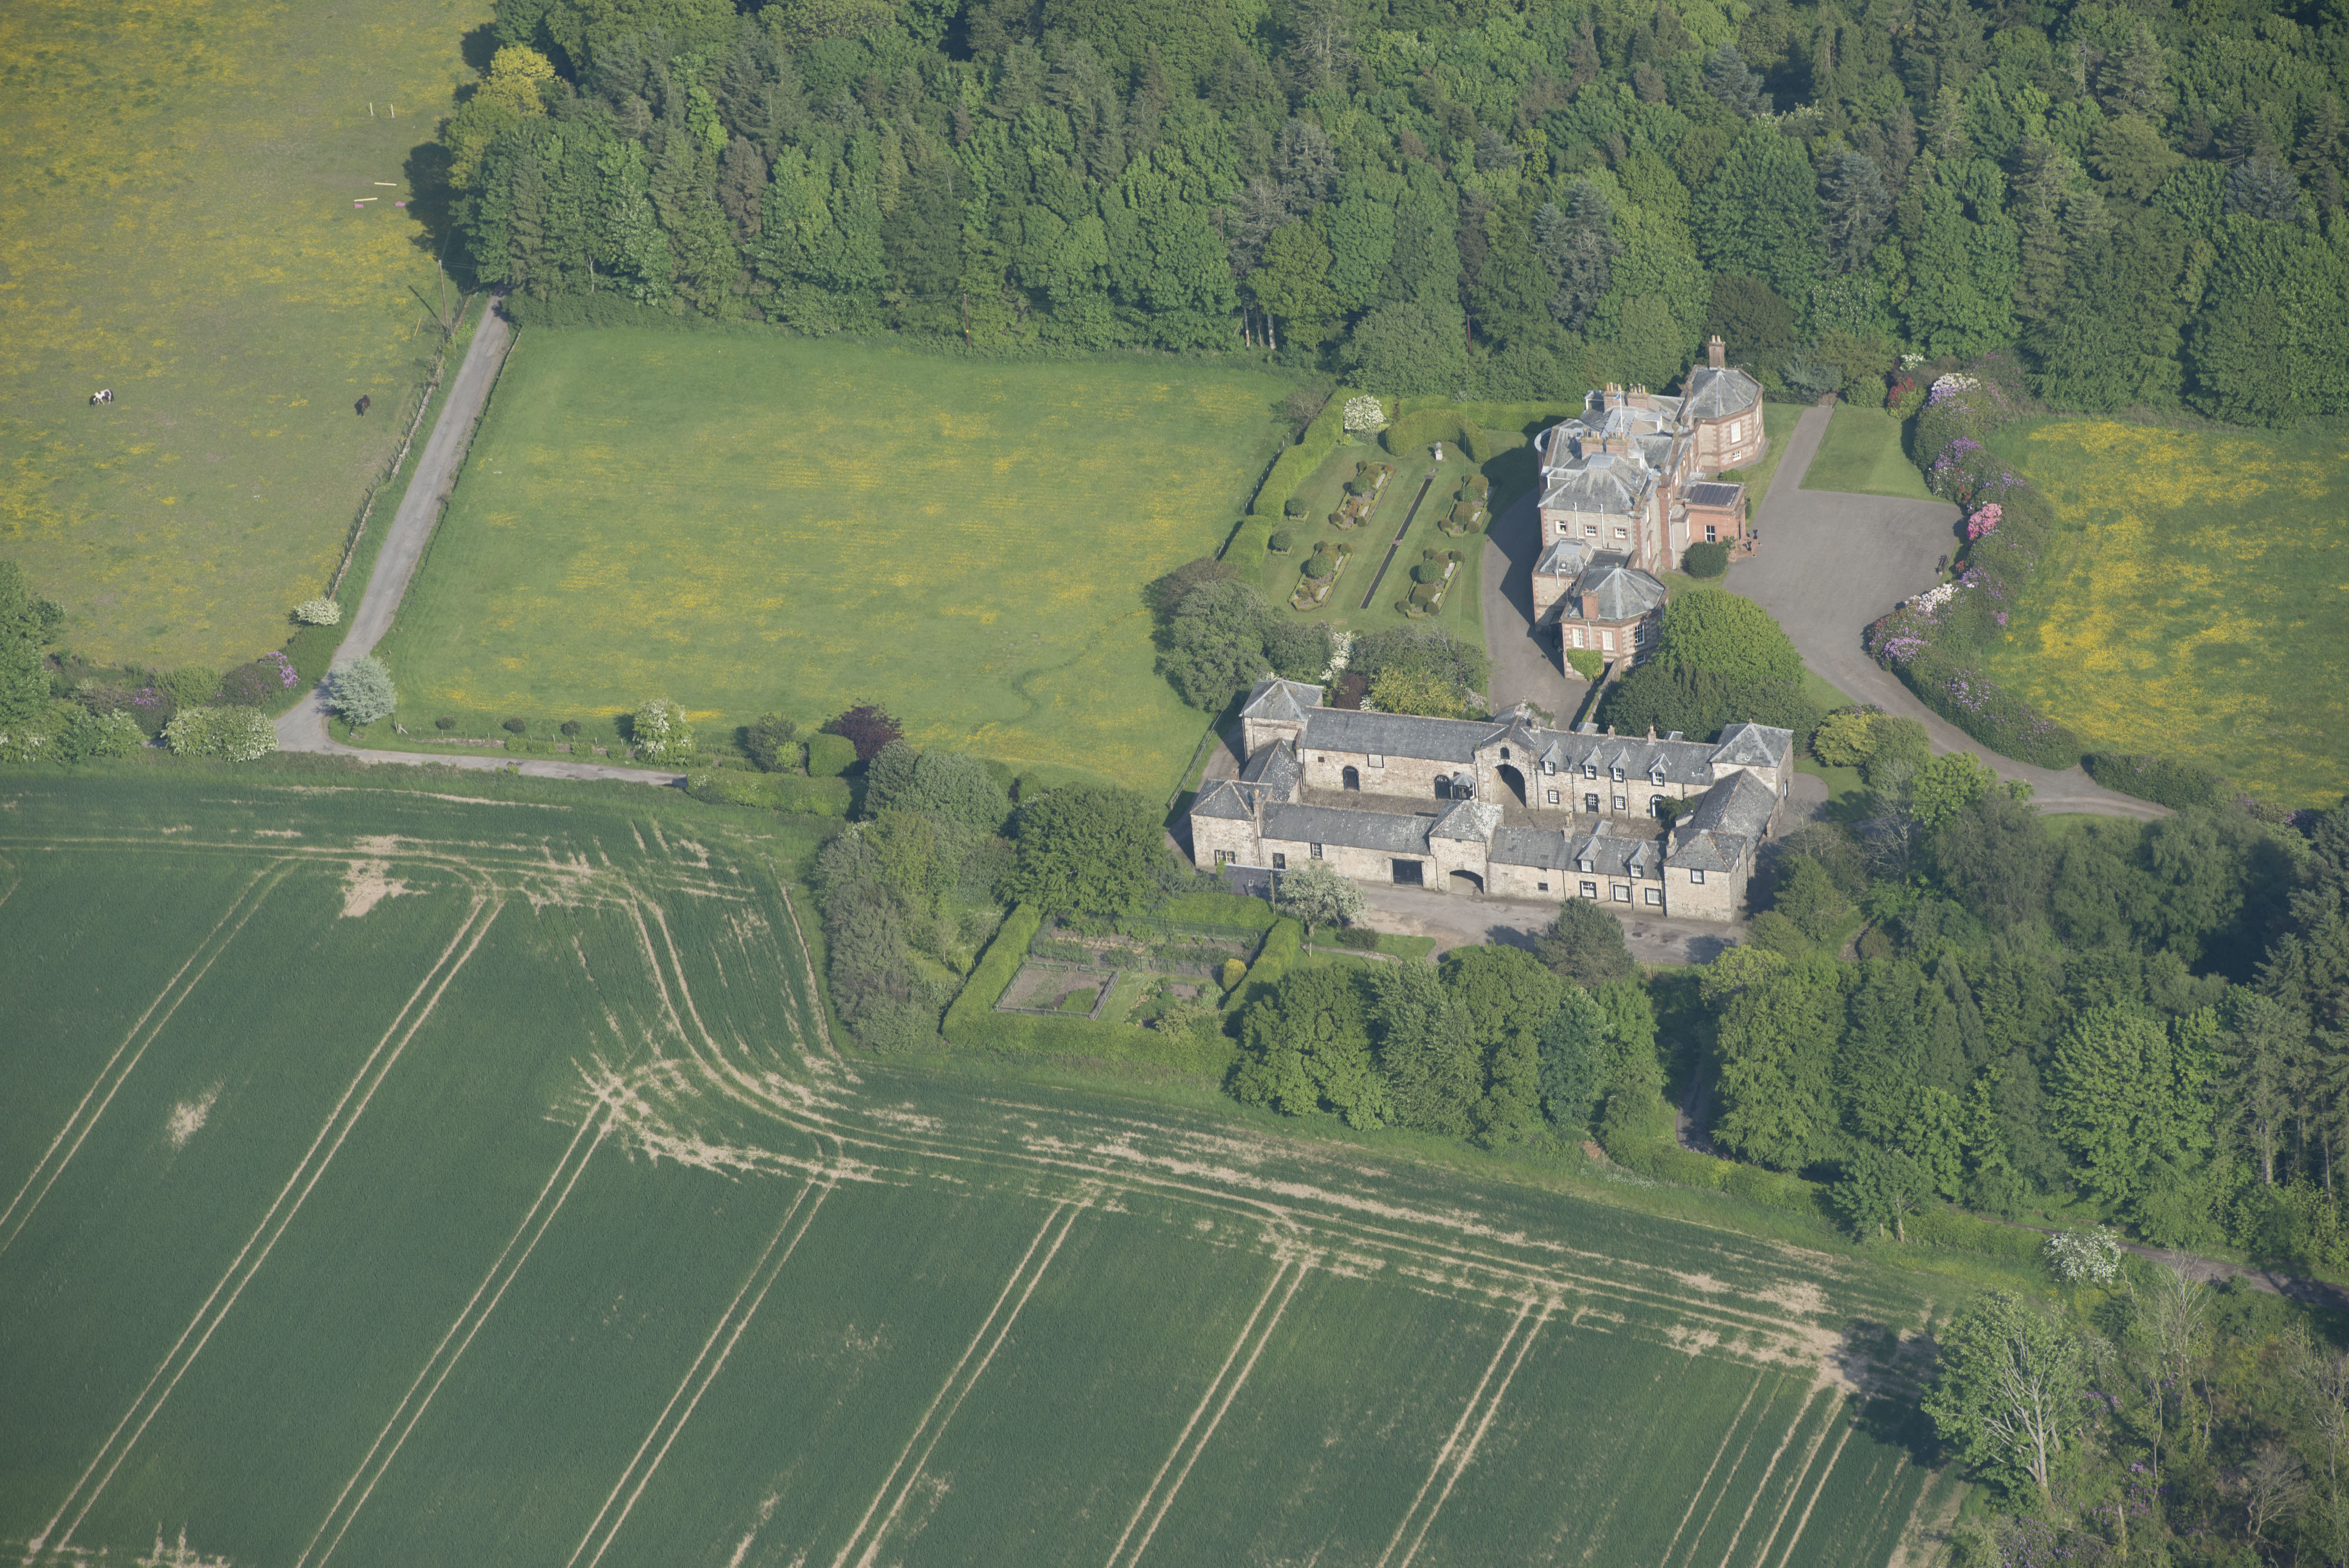 An aerial shot of a country estate. There is a house, stables and outbuildings. Next to the house there is a well-kept garden. Farmland and trees surround the estate. 